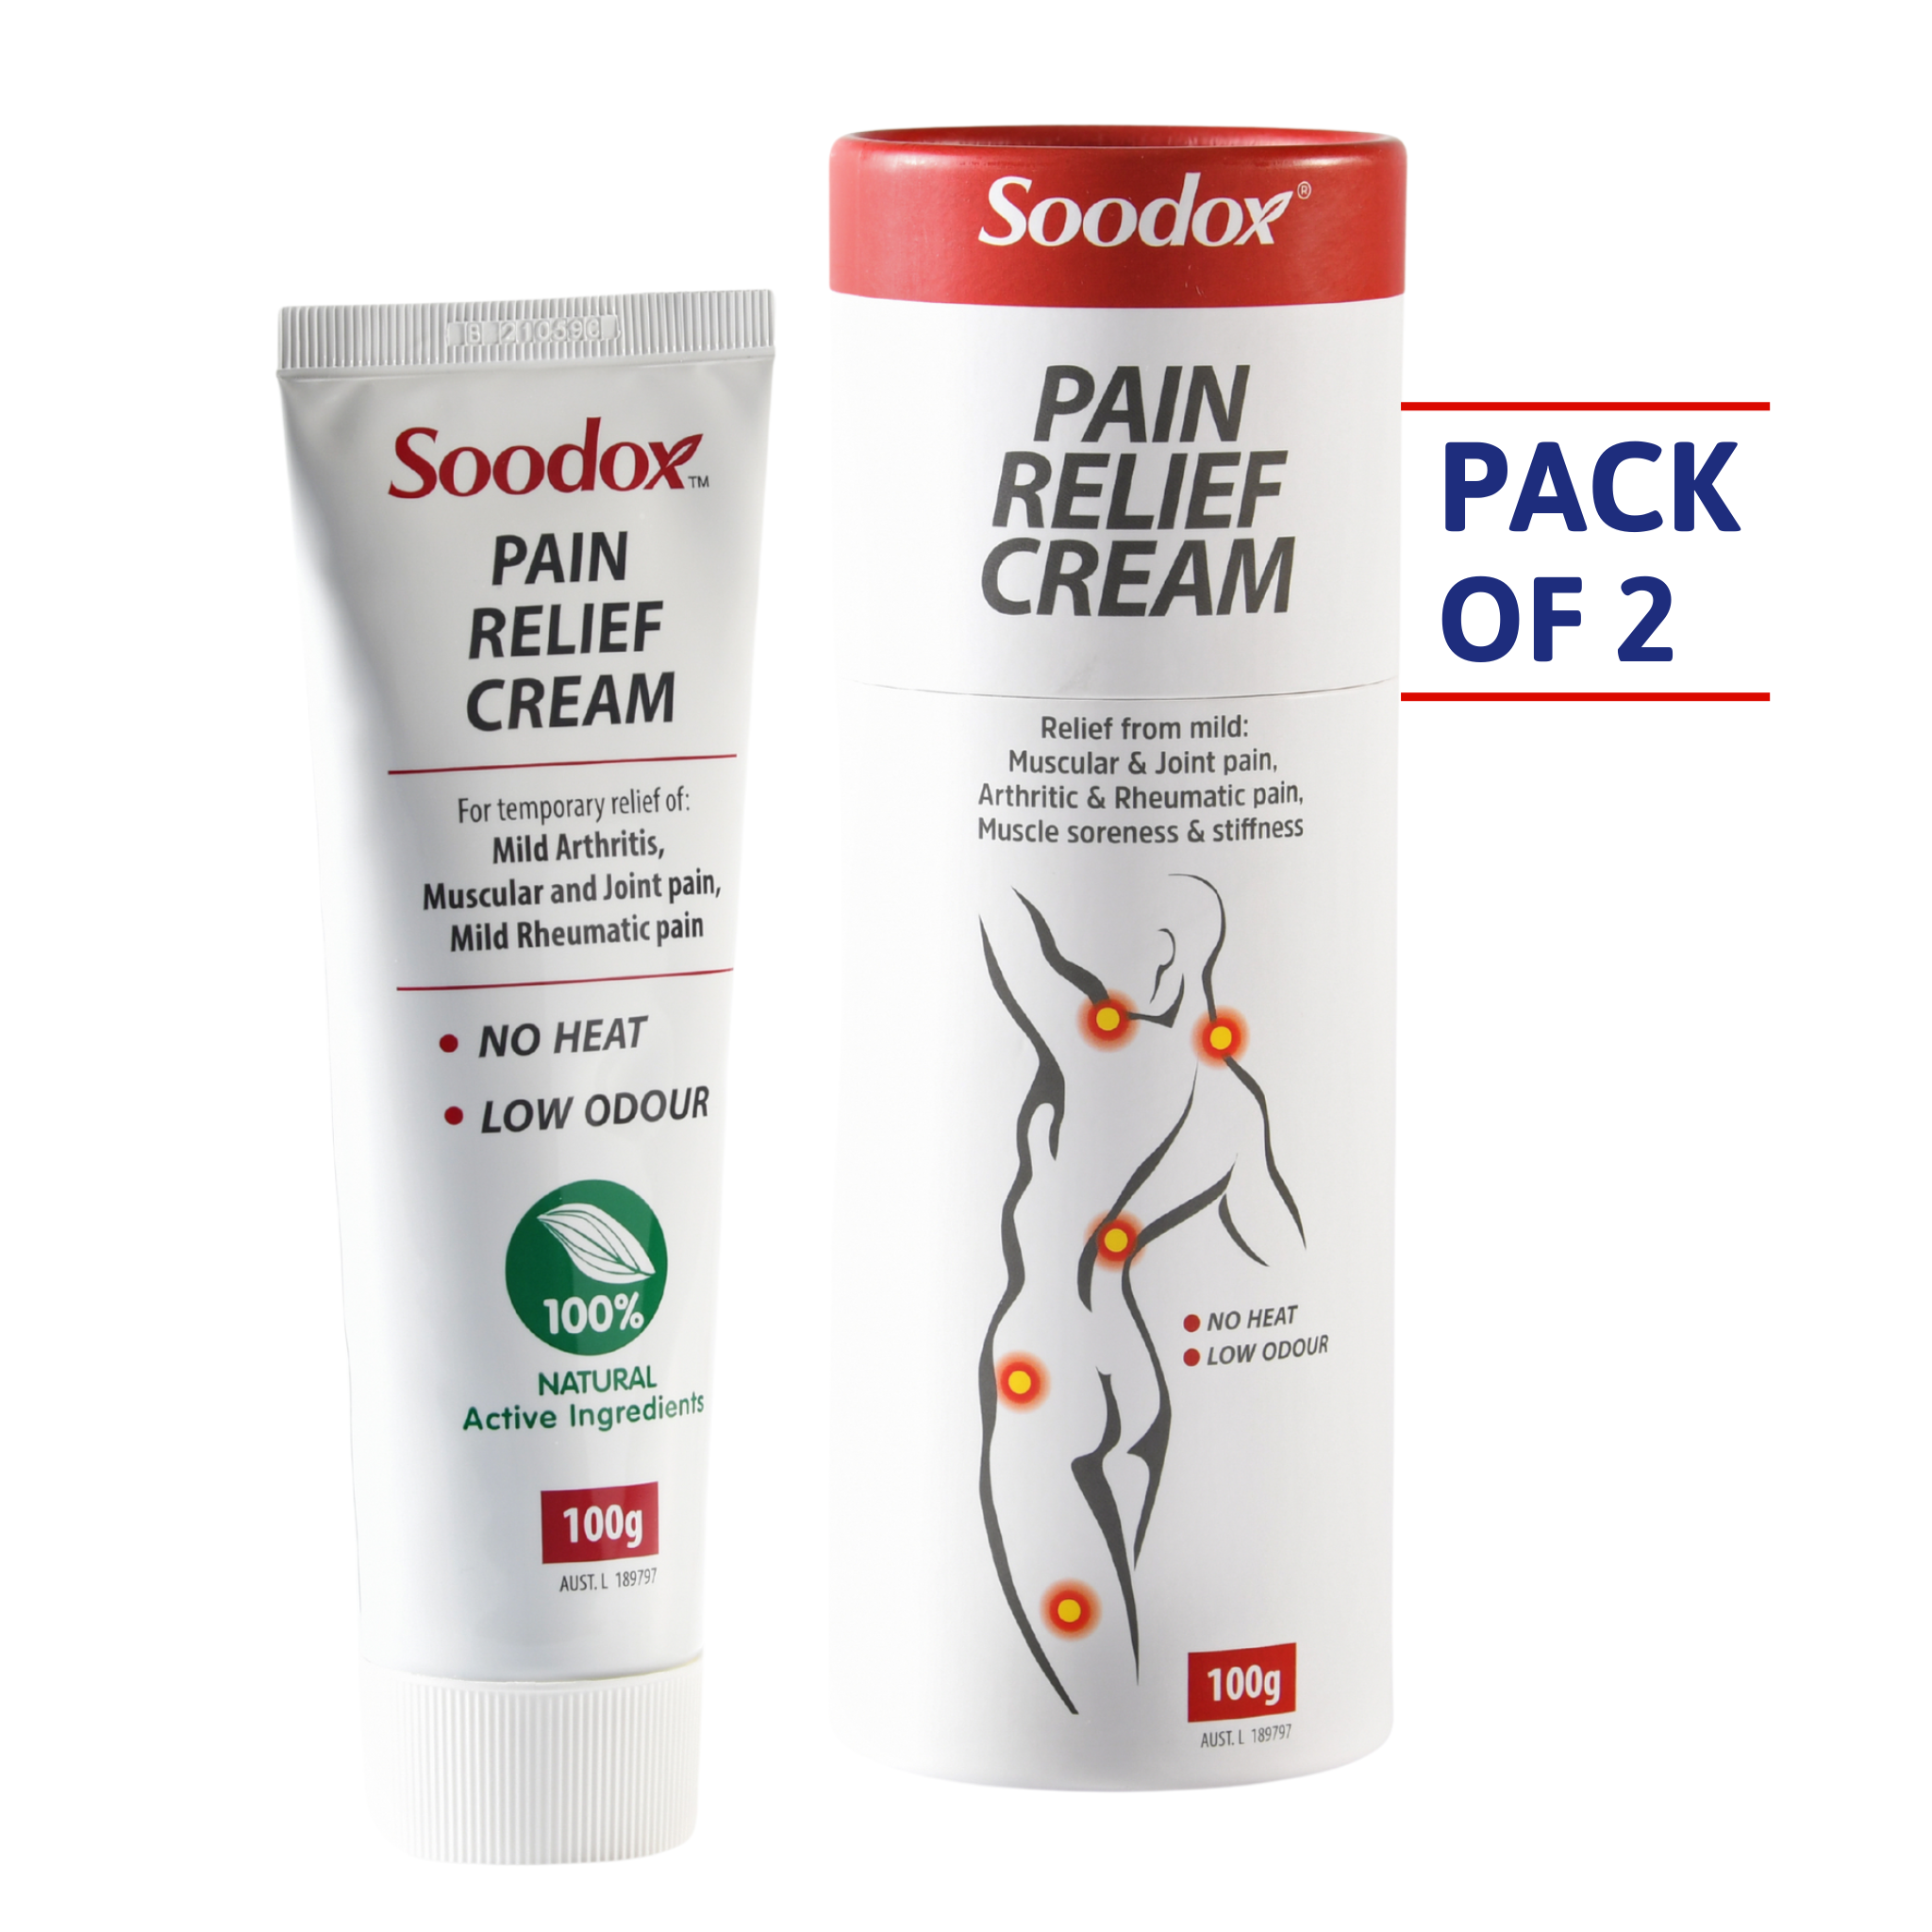 Soodox pain relief cream pack of 2